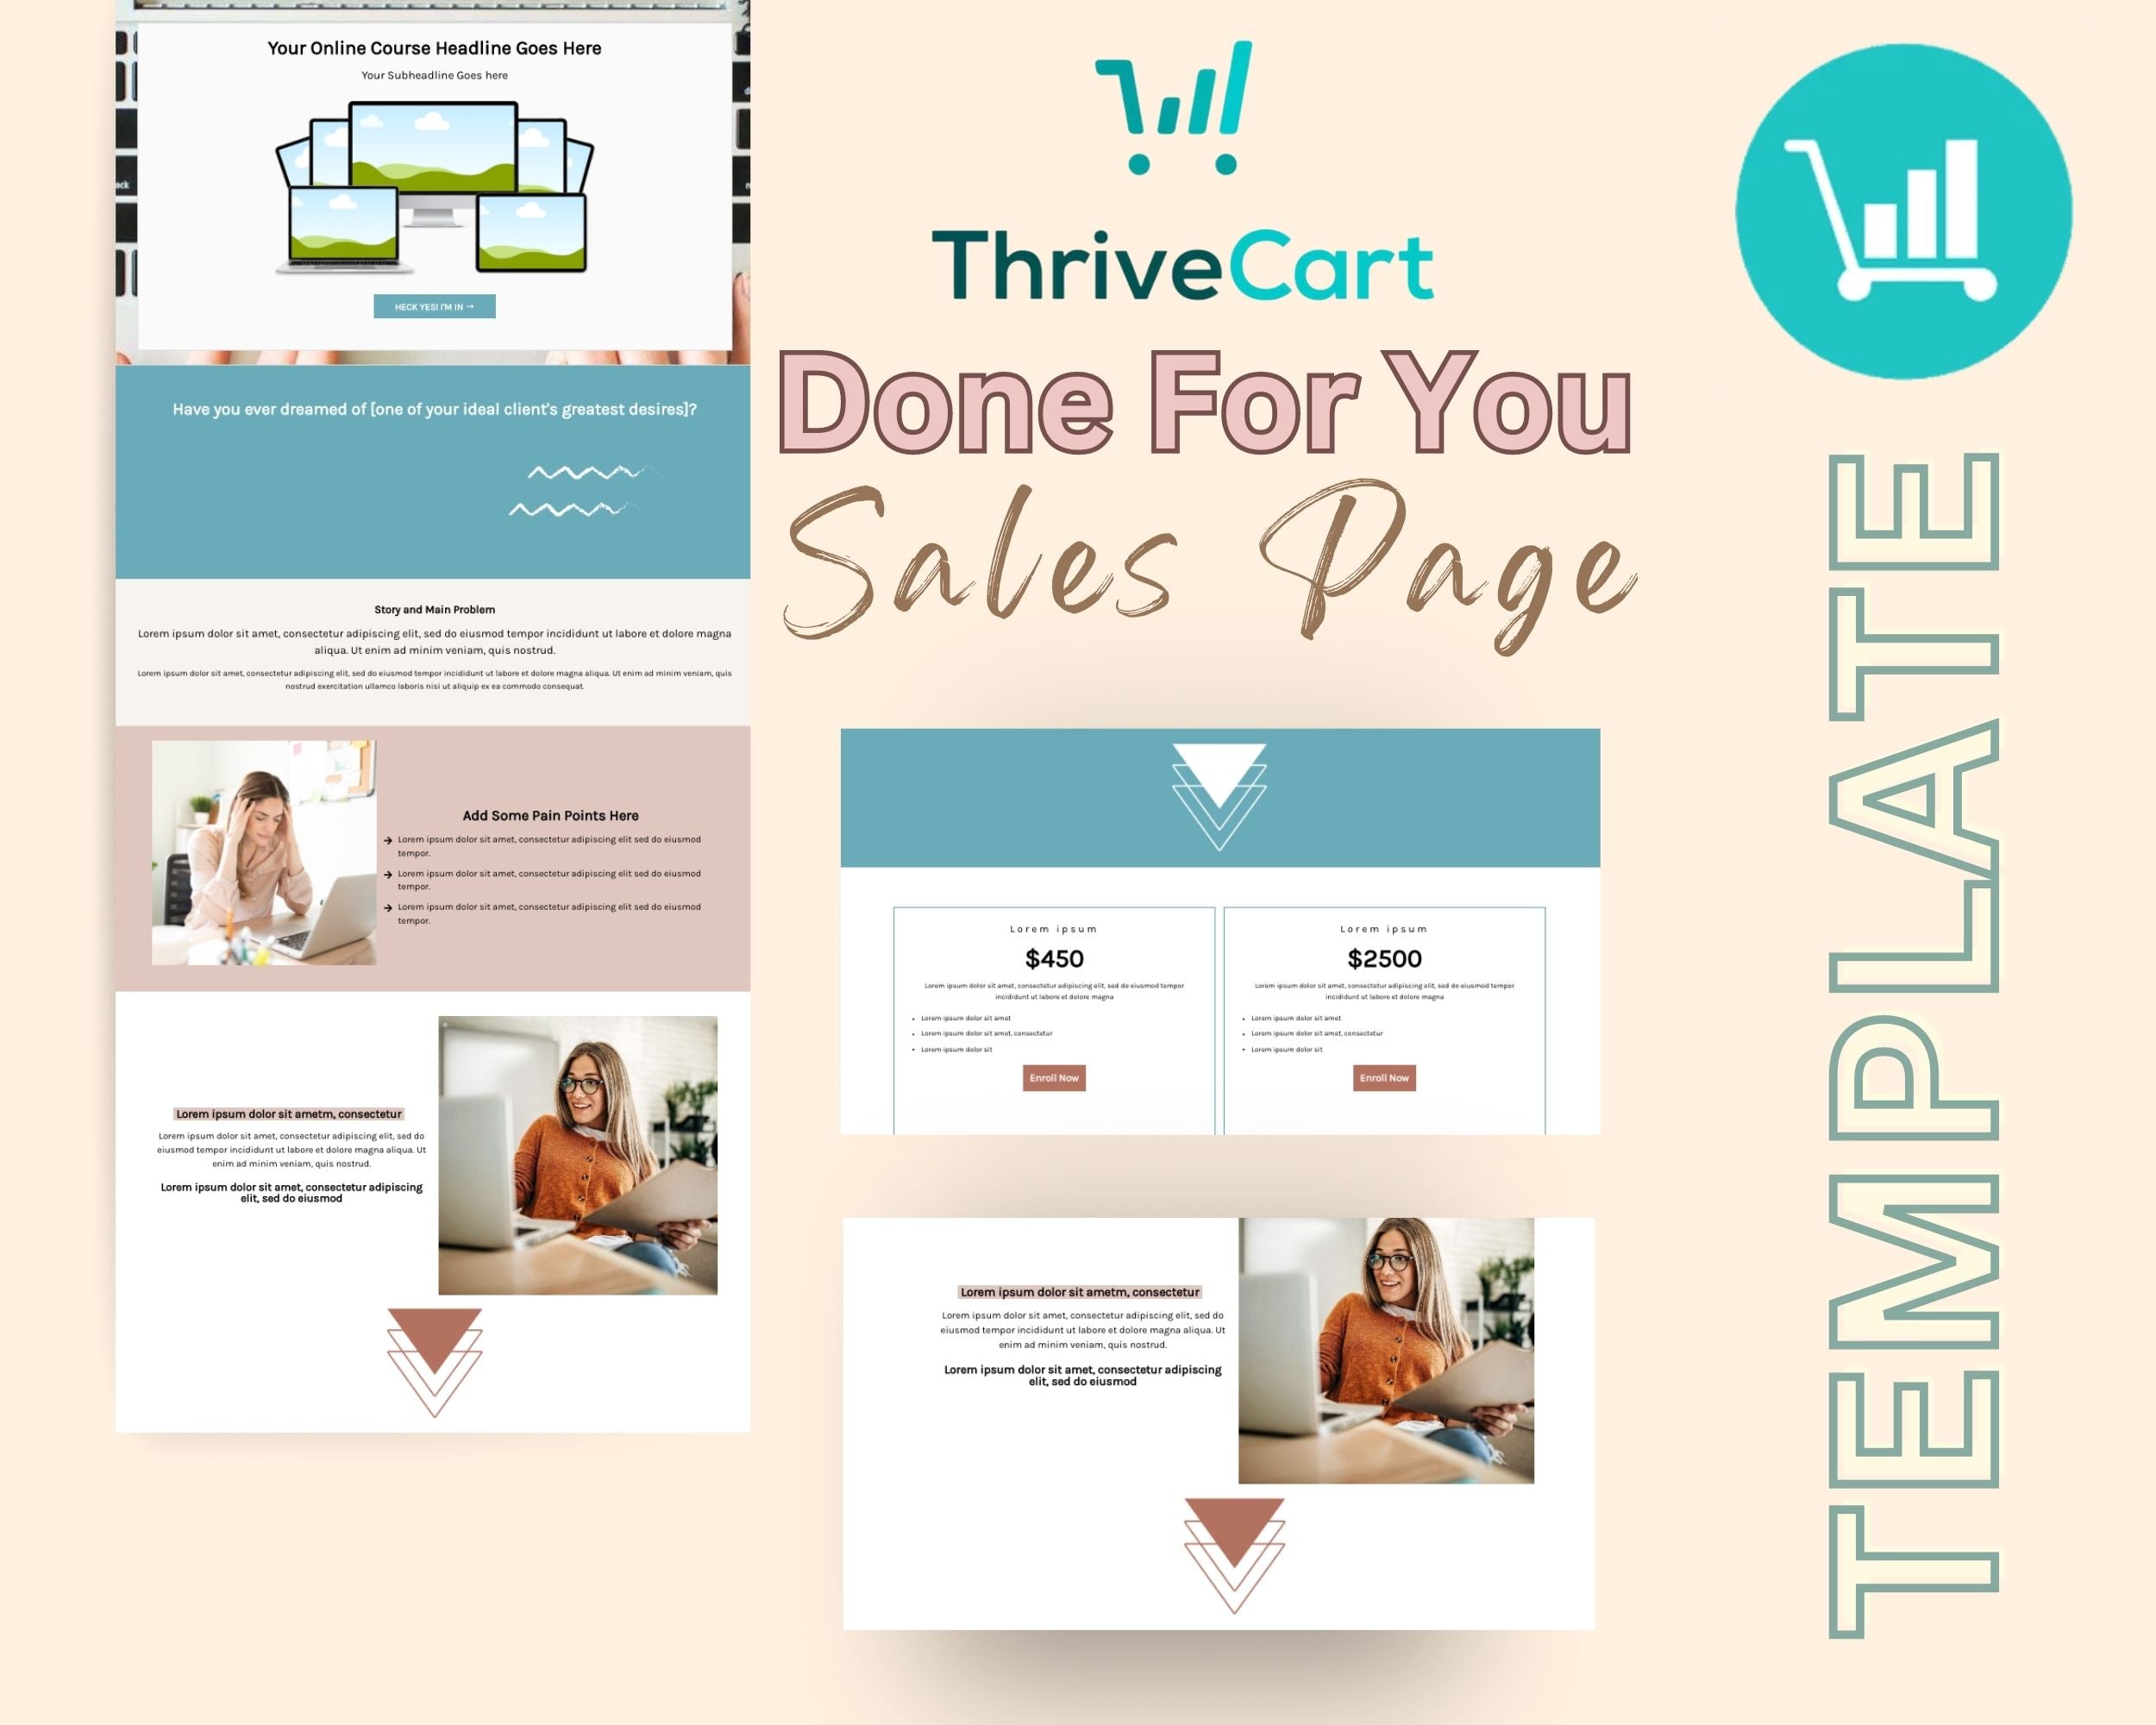 Boho Online Course Sales Page Template in Thrivecart